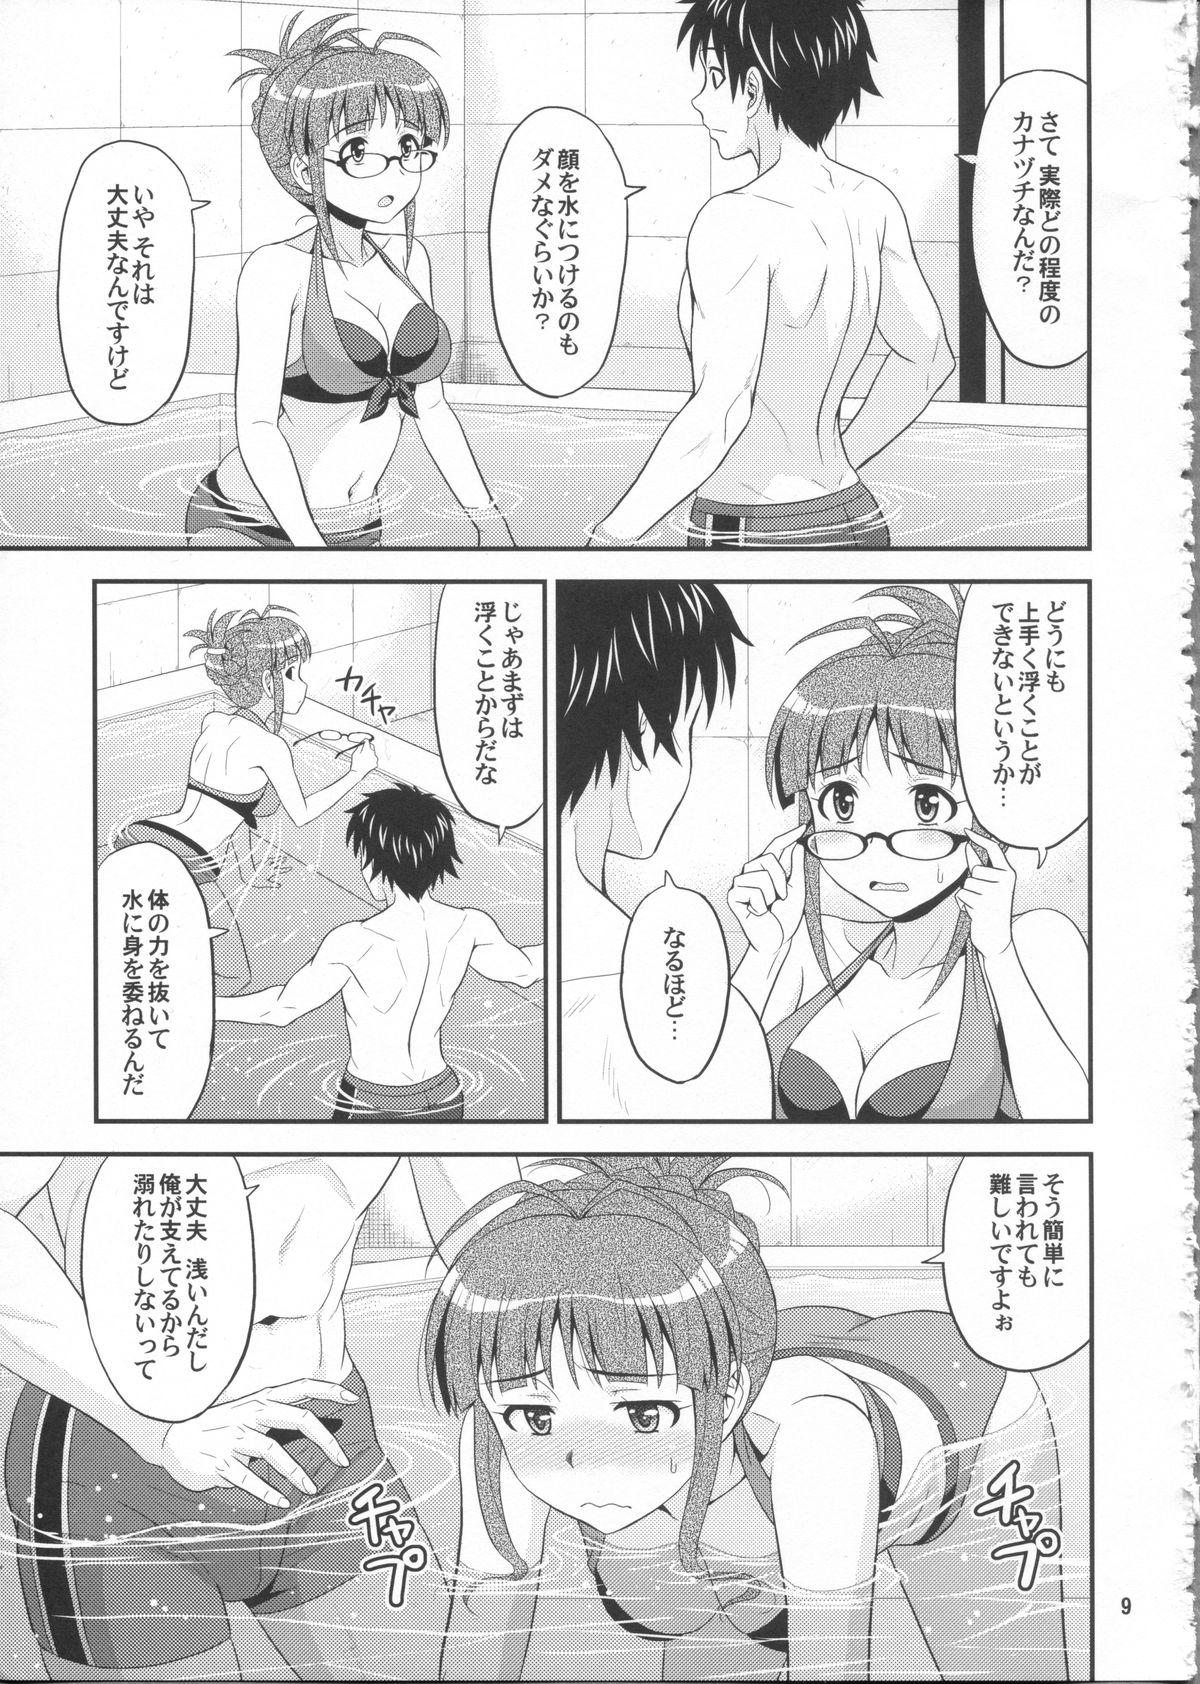 All Natural Training for You! - The idolmaster Village - Page 9